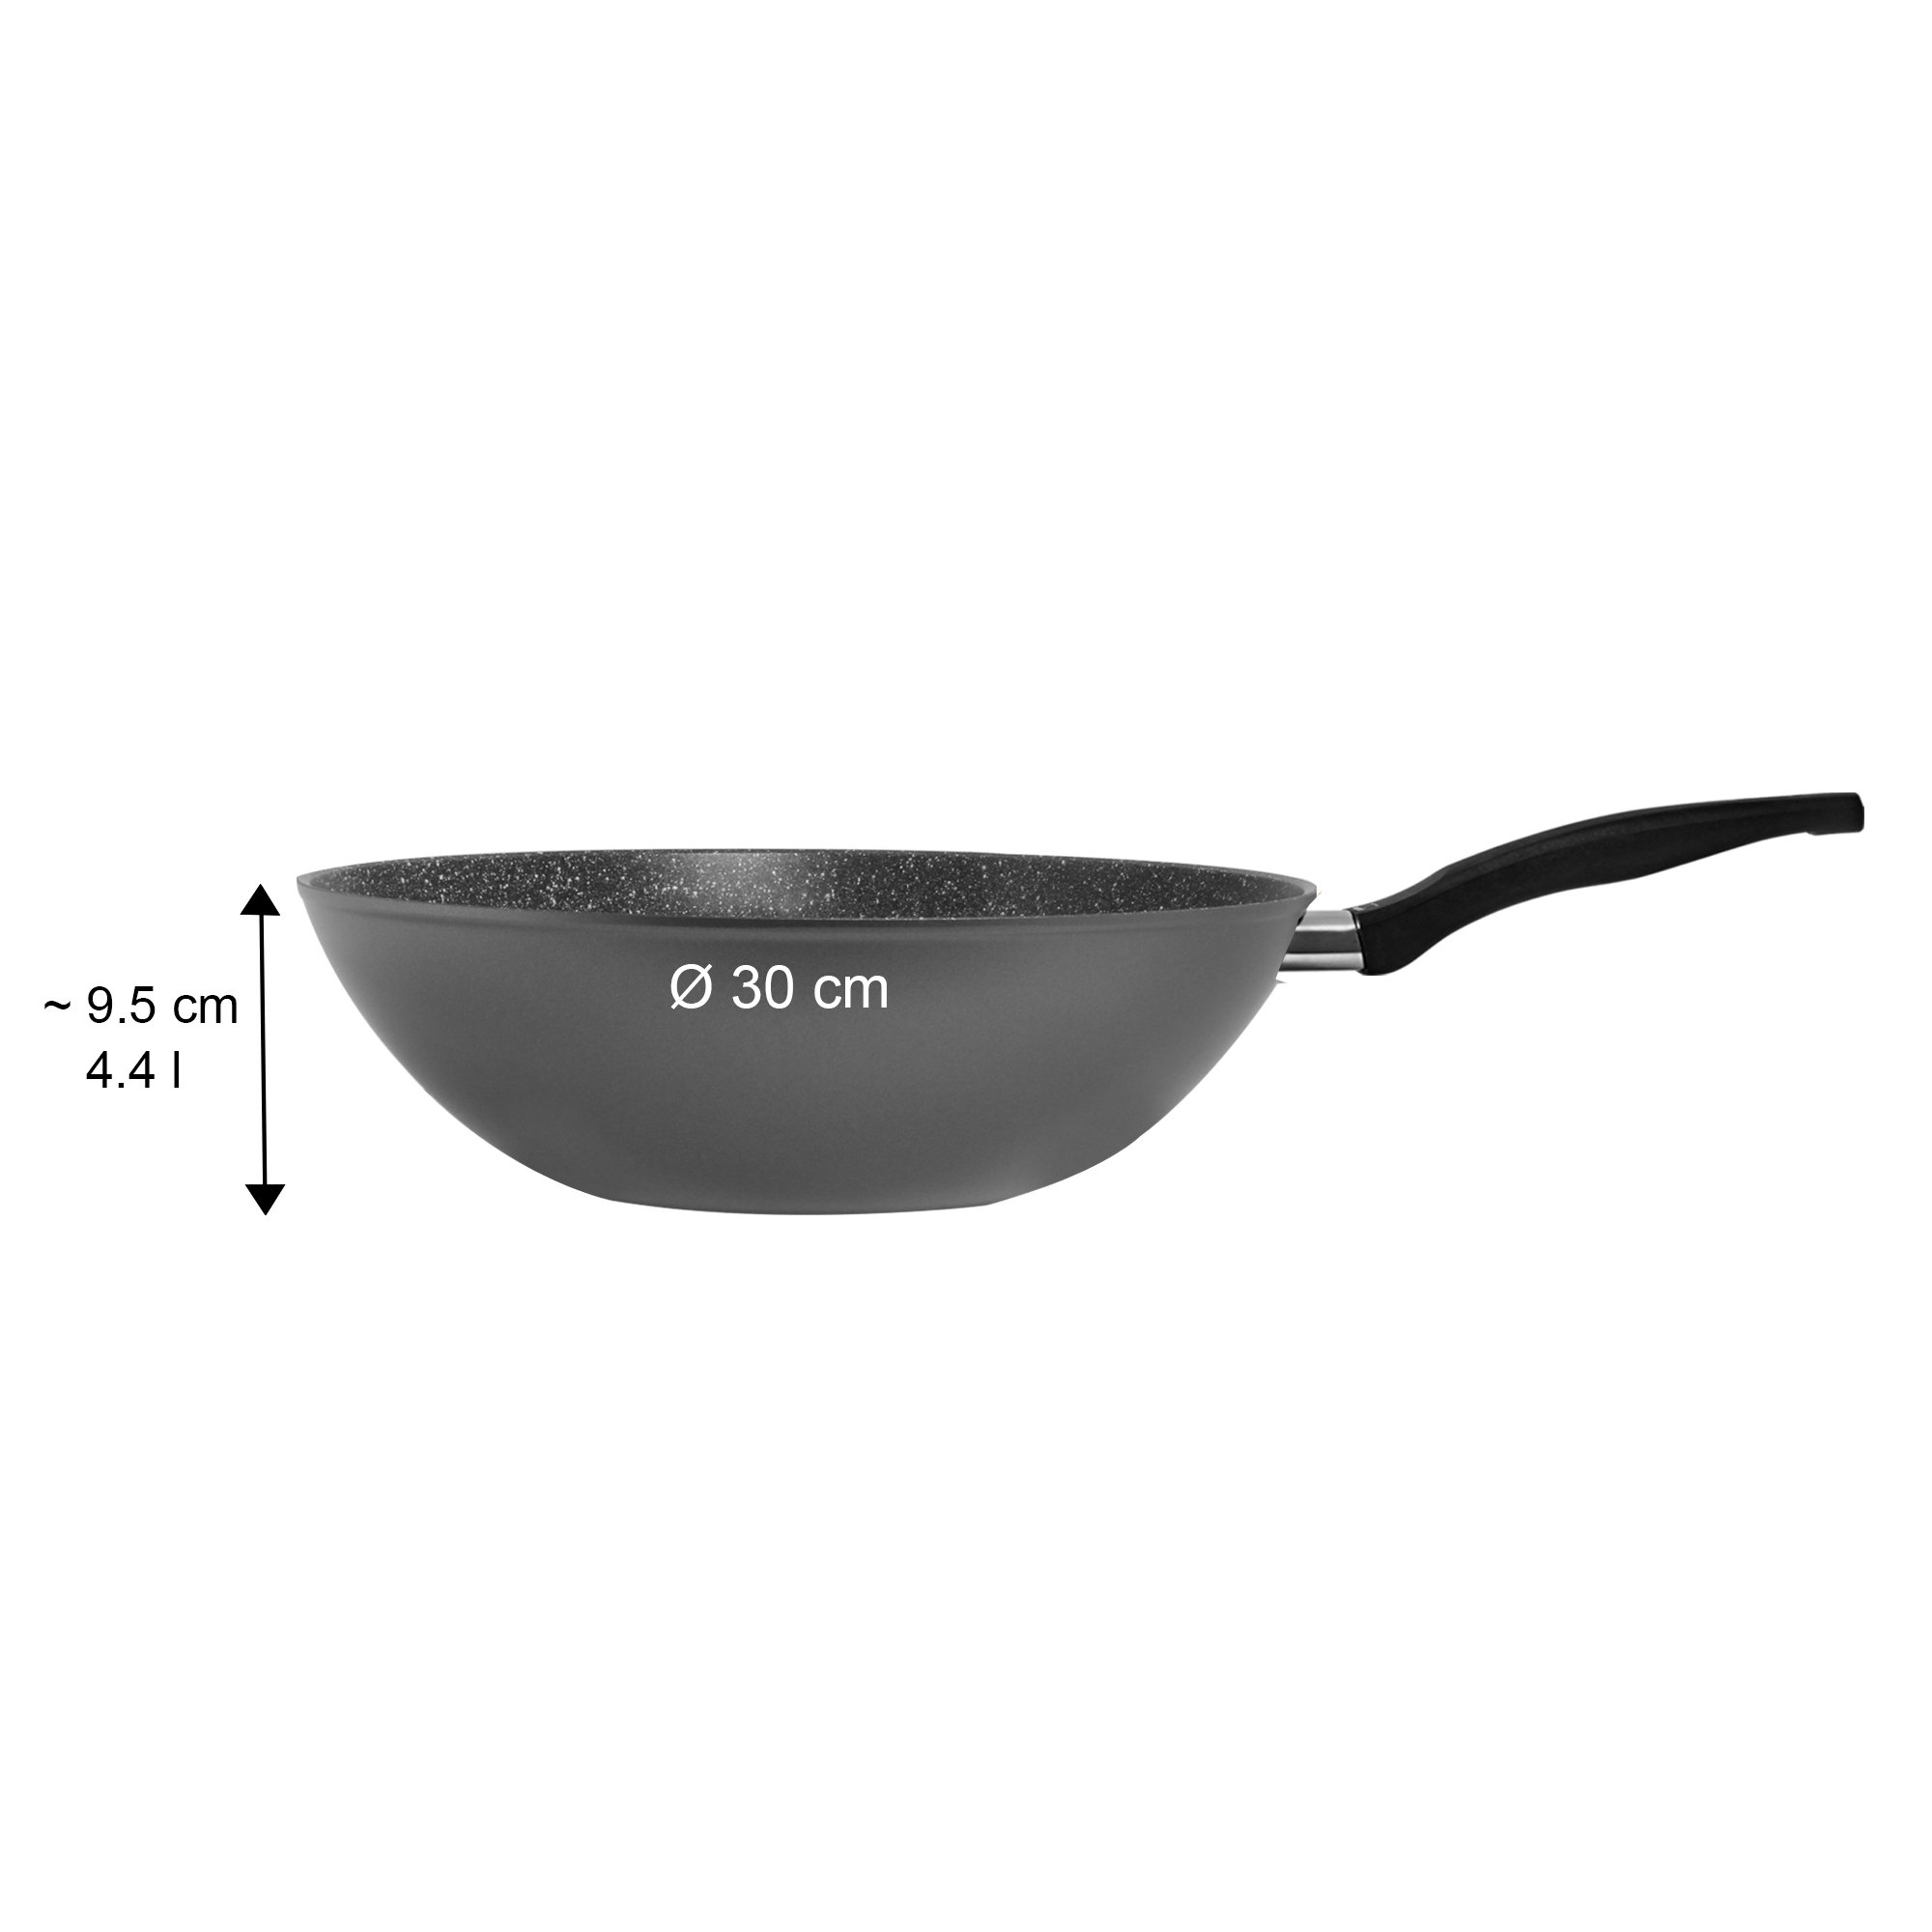 STONELINE® wok pan 30cm, Made in Germany, wok non-stick coated, suitable for induction